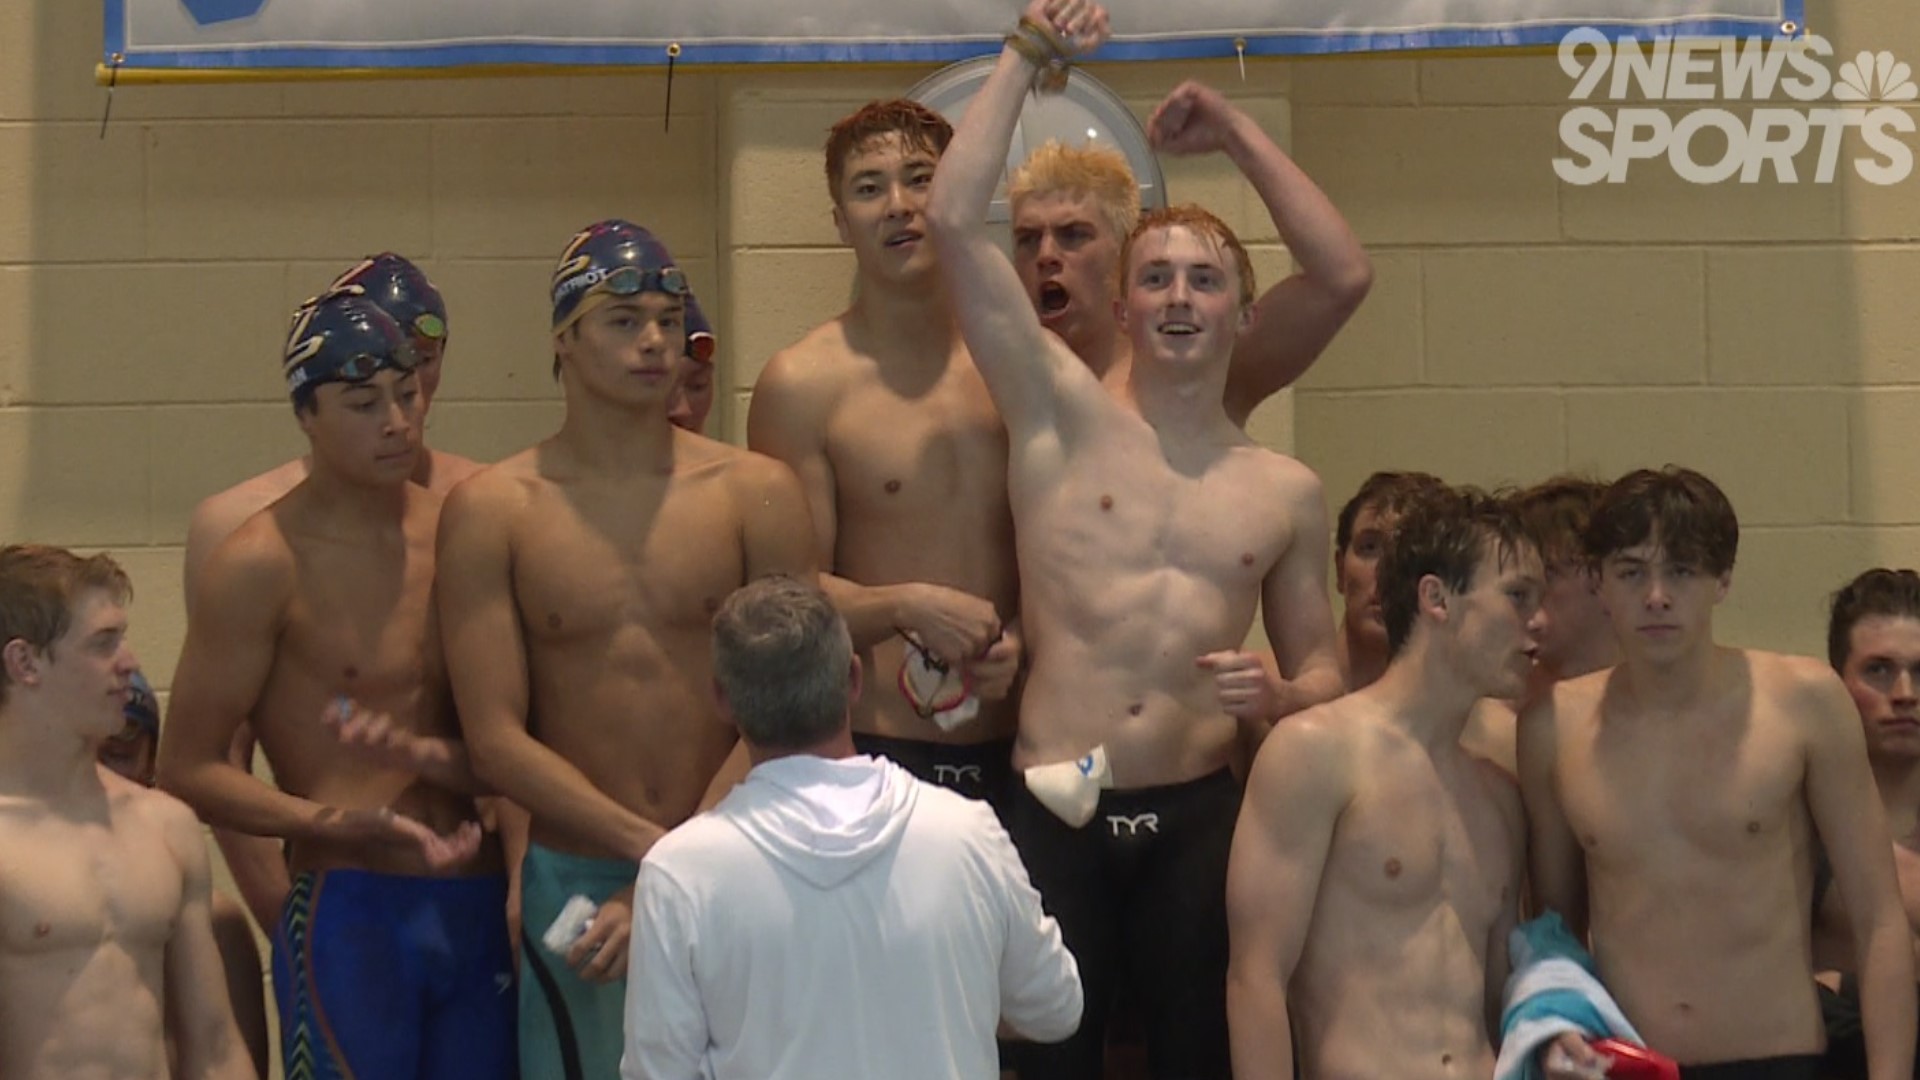 Regis Jesuit won the team title on Saturday at the 2022 Class 5A boys swimming state championship meet.